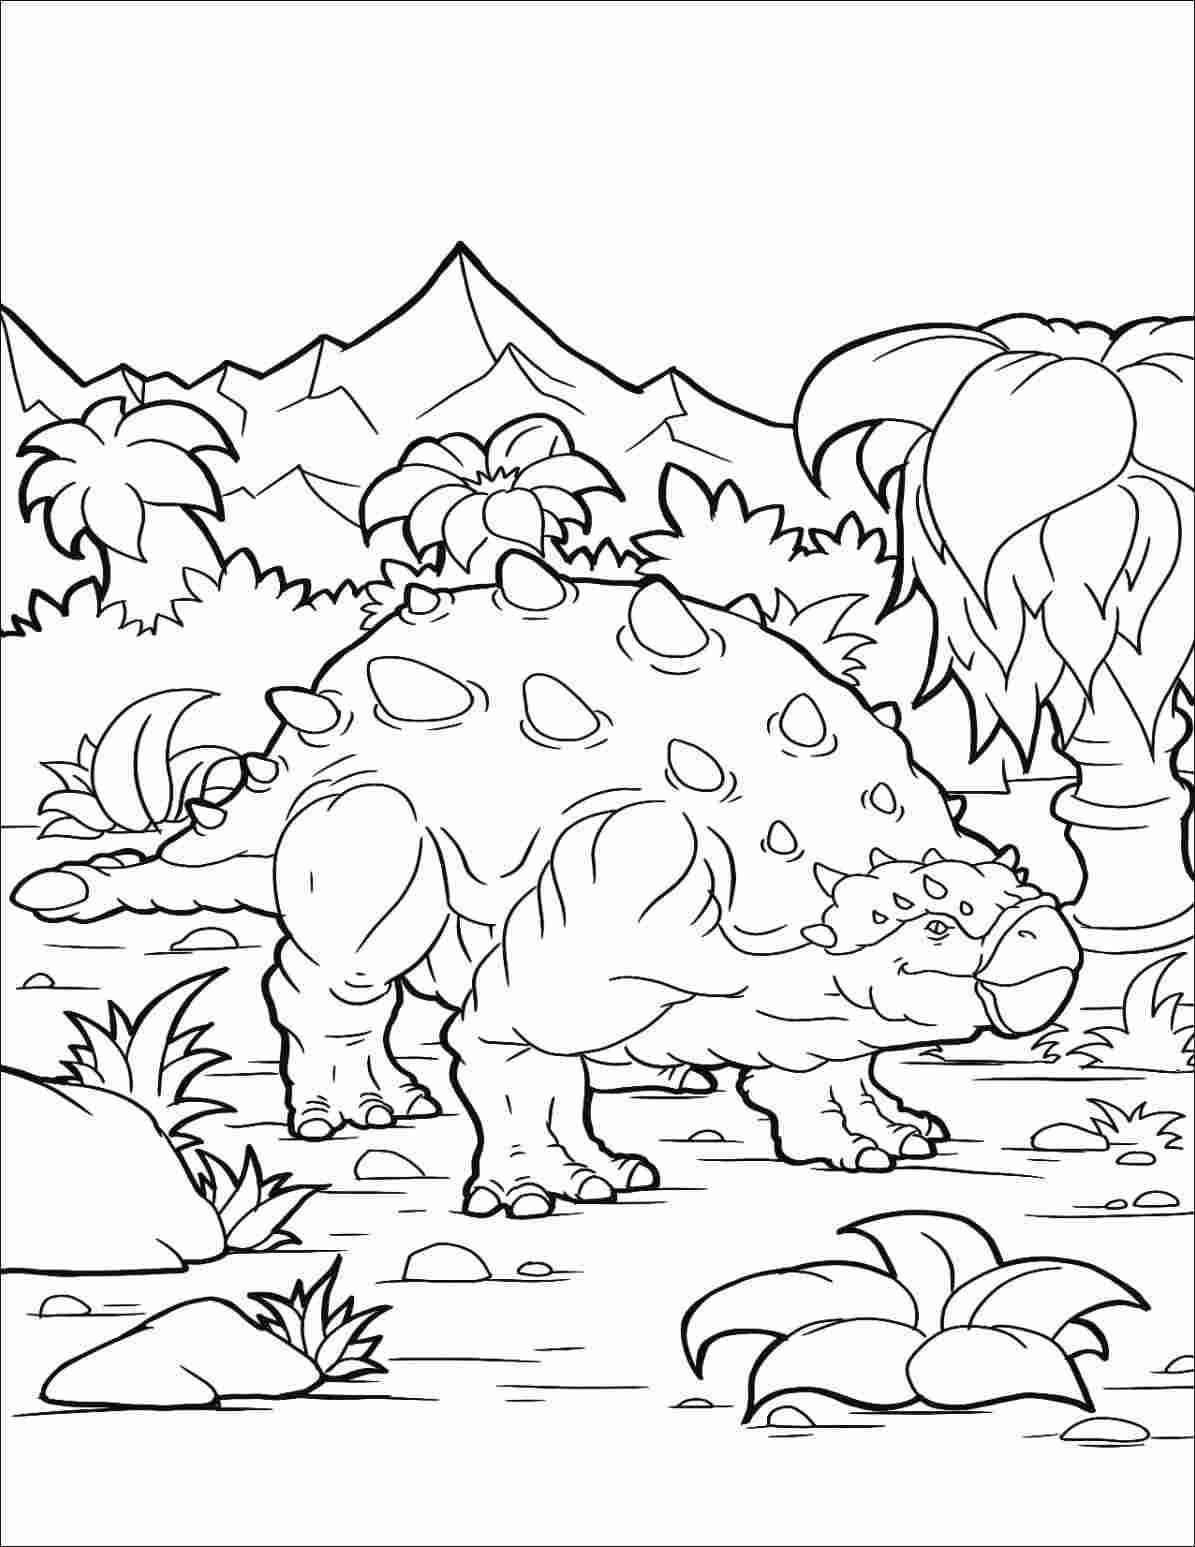 Ankylosaurus has horns on its back Coloring Pages